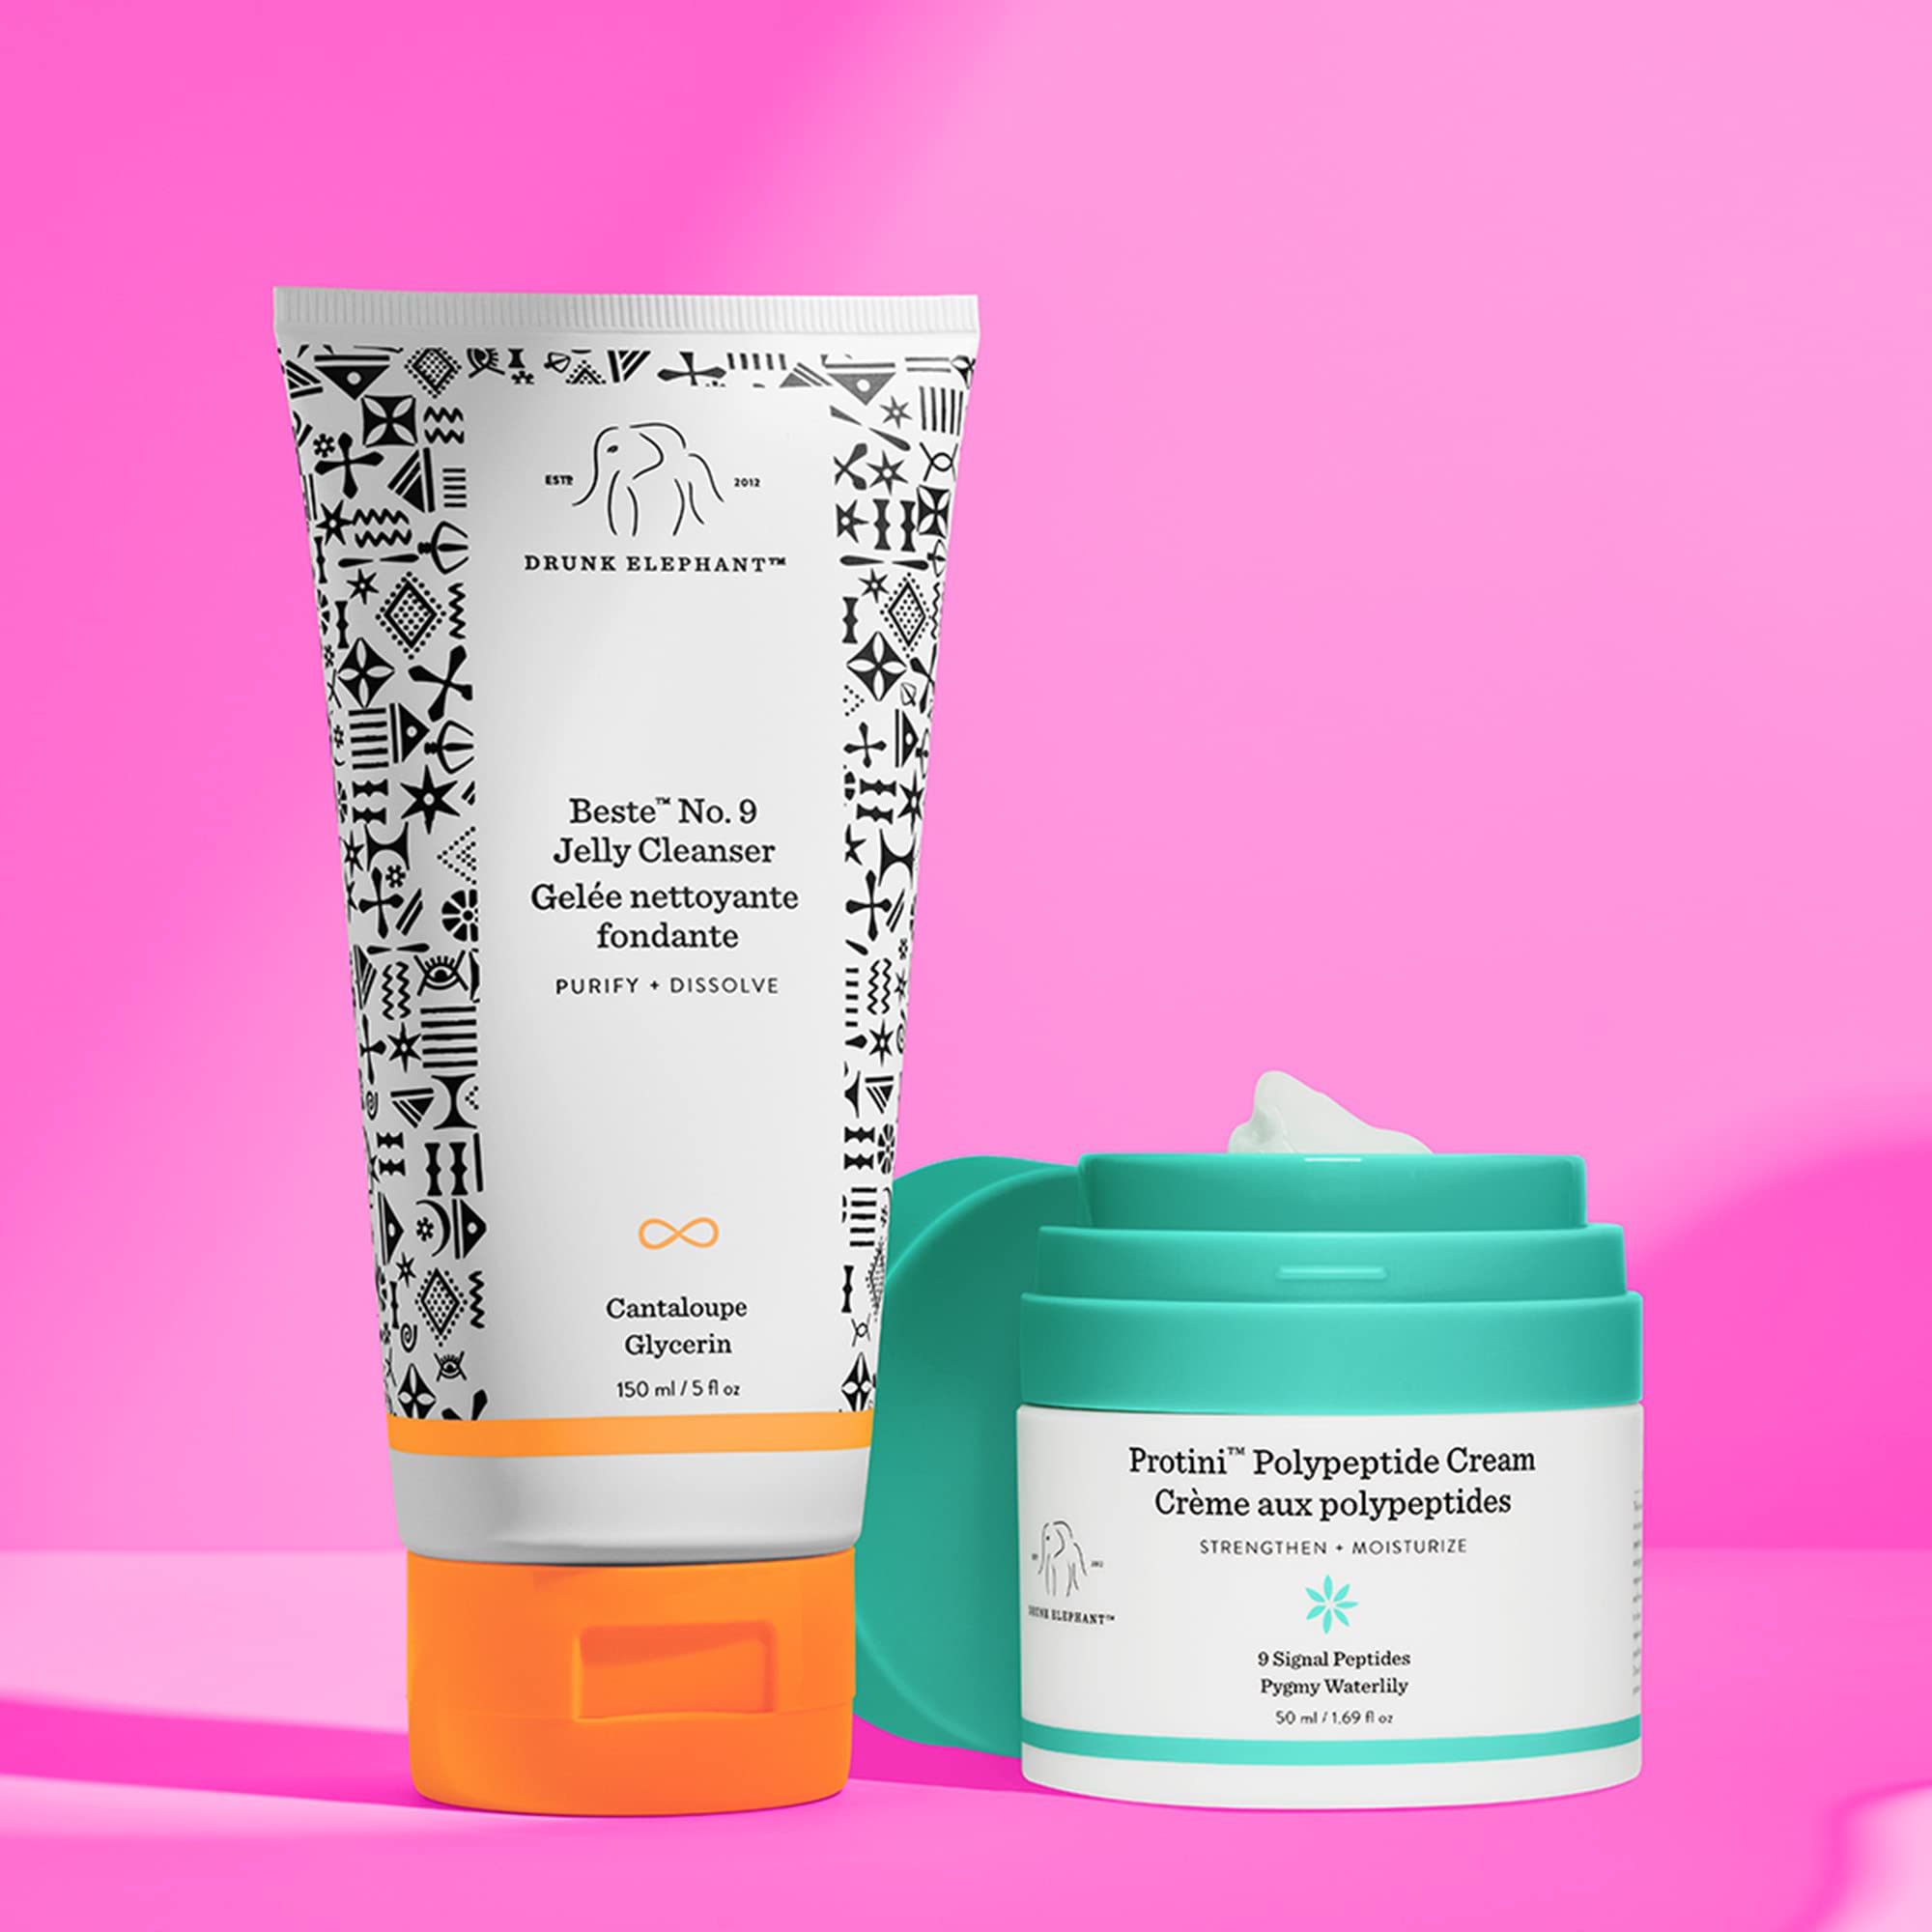 Drunk Elephant Protini Polypeptide Cream & Beste No 9 Jelly Cleanser Duo. Protein Face Moisturizer with Amino Acids. Gentle Face Wash and Makeup Remover. (50mL and 150mL)